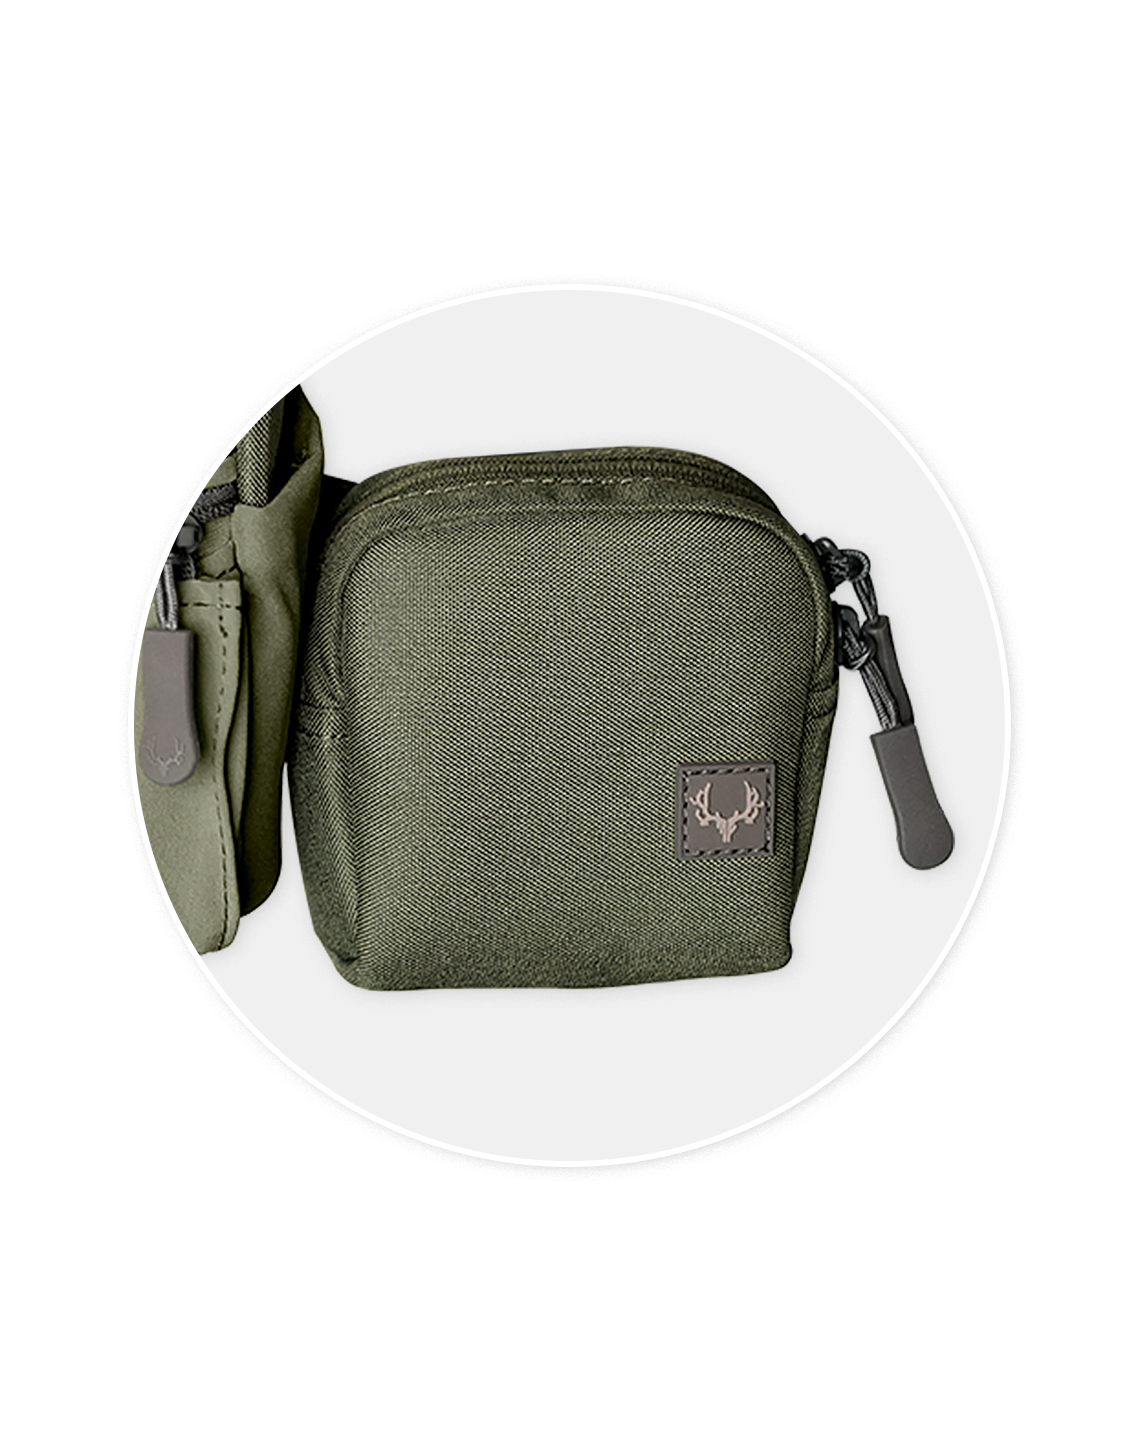 Muley Freak ranger green accessory pouch with bullet sleeves.